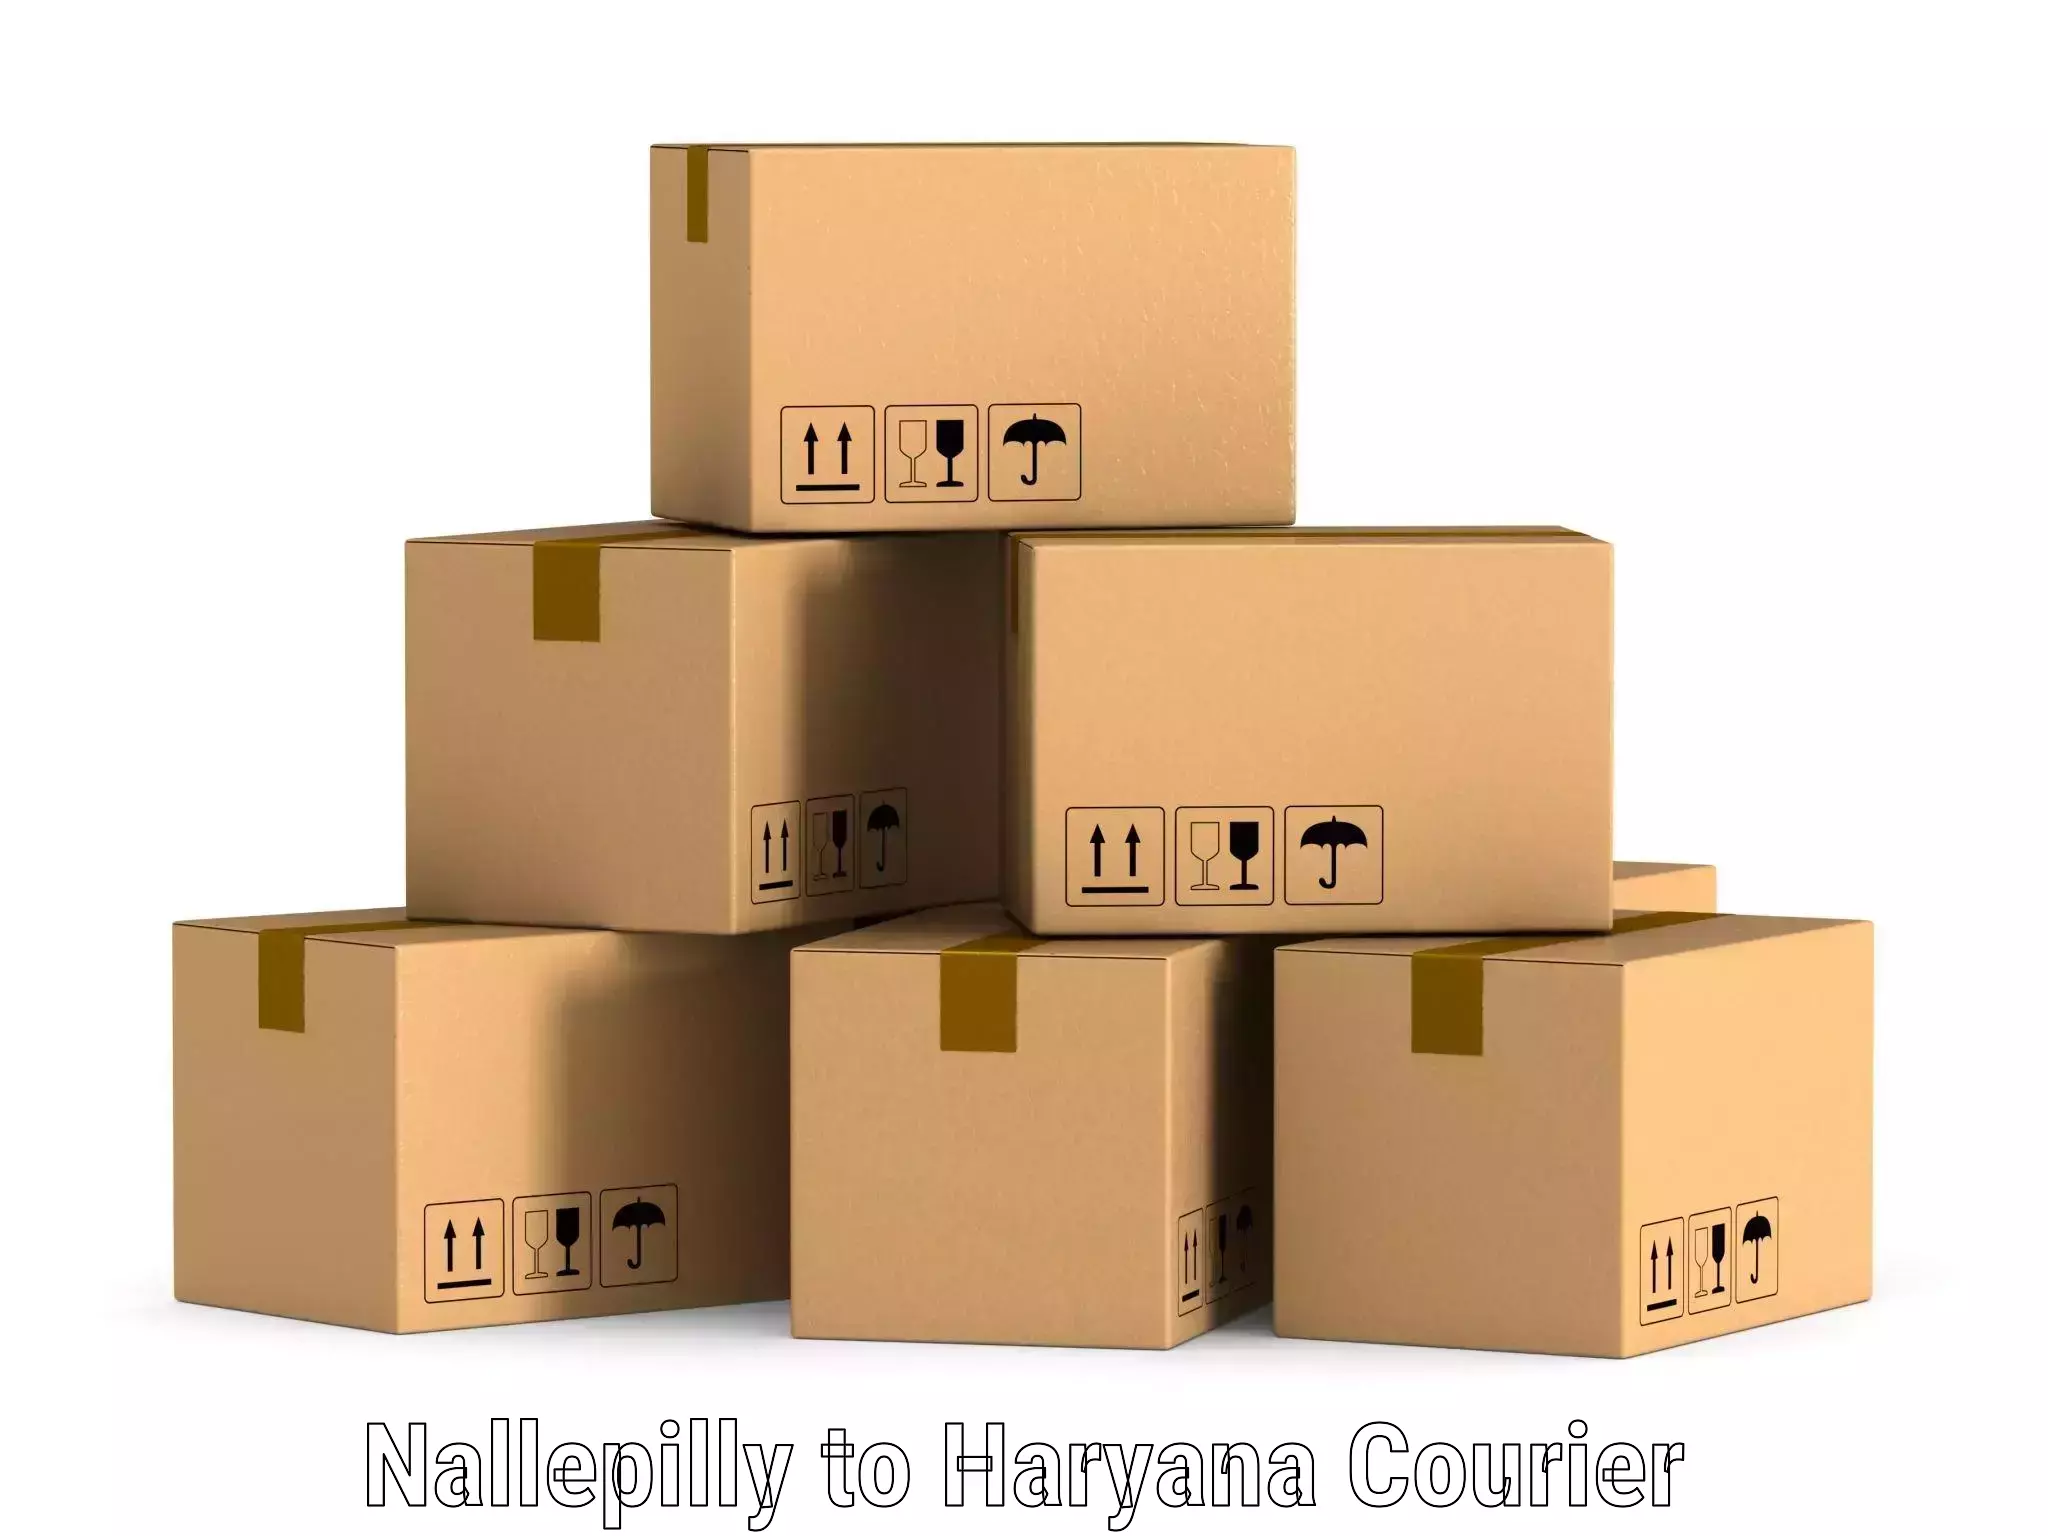 Courier service comparison Nallepilly to Chaudhary Charan Singh Haryana Agricultural University Hisar